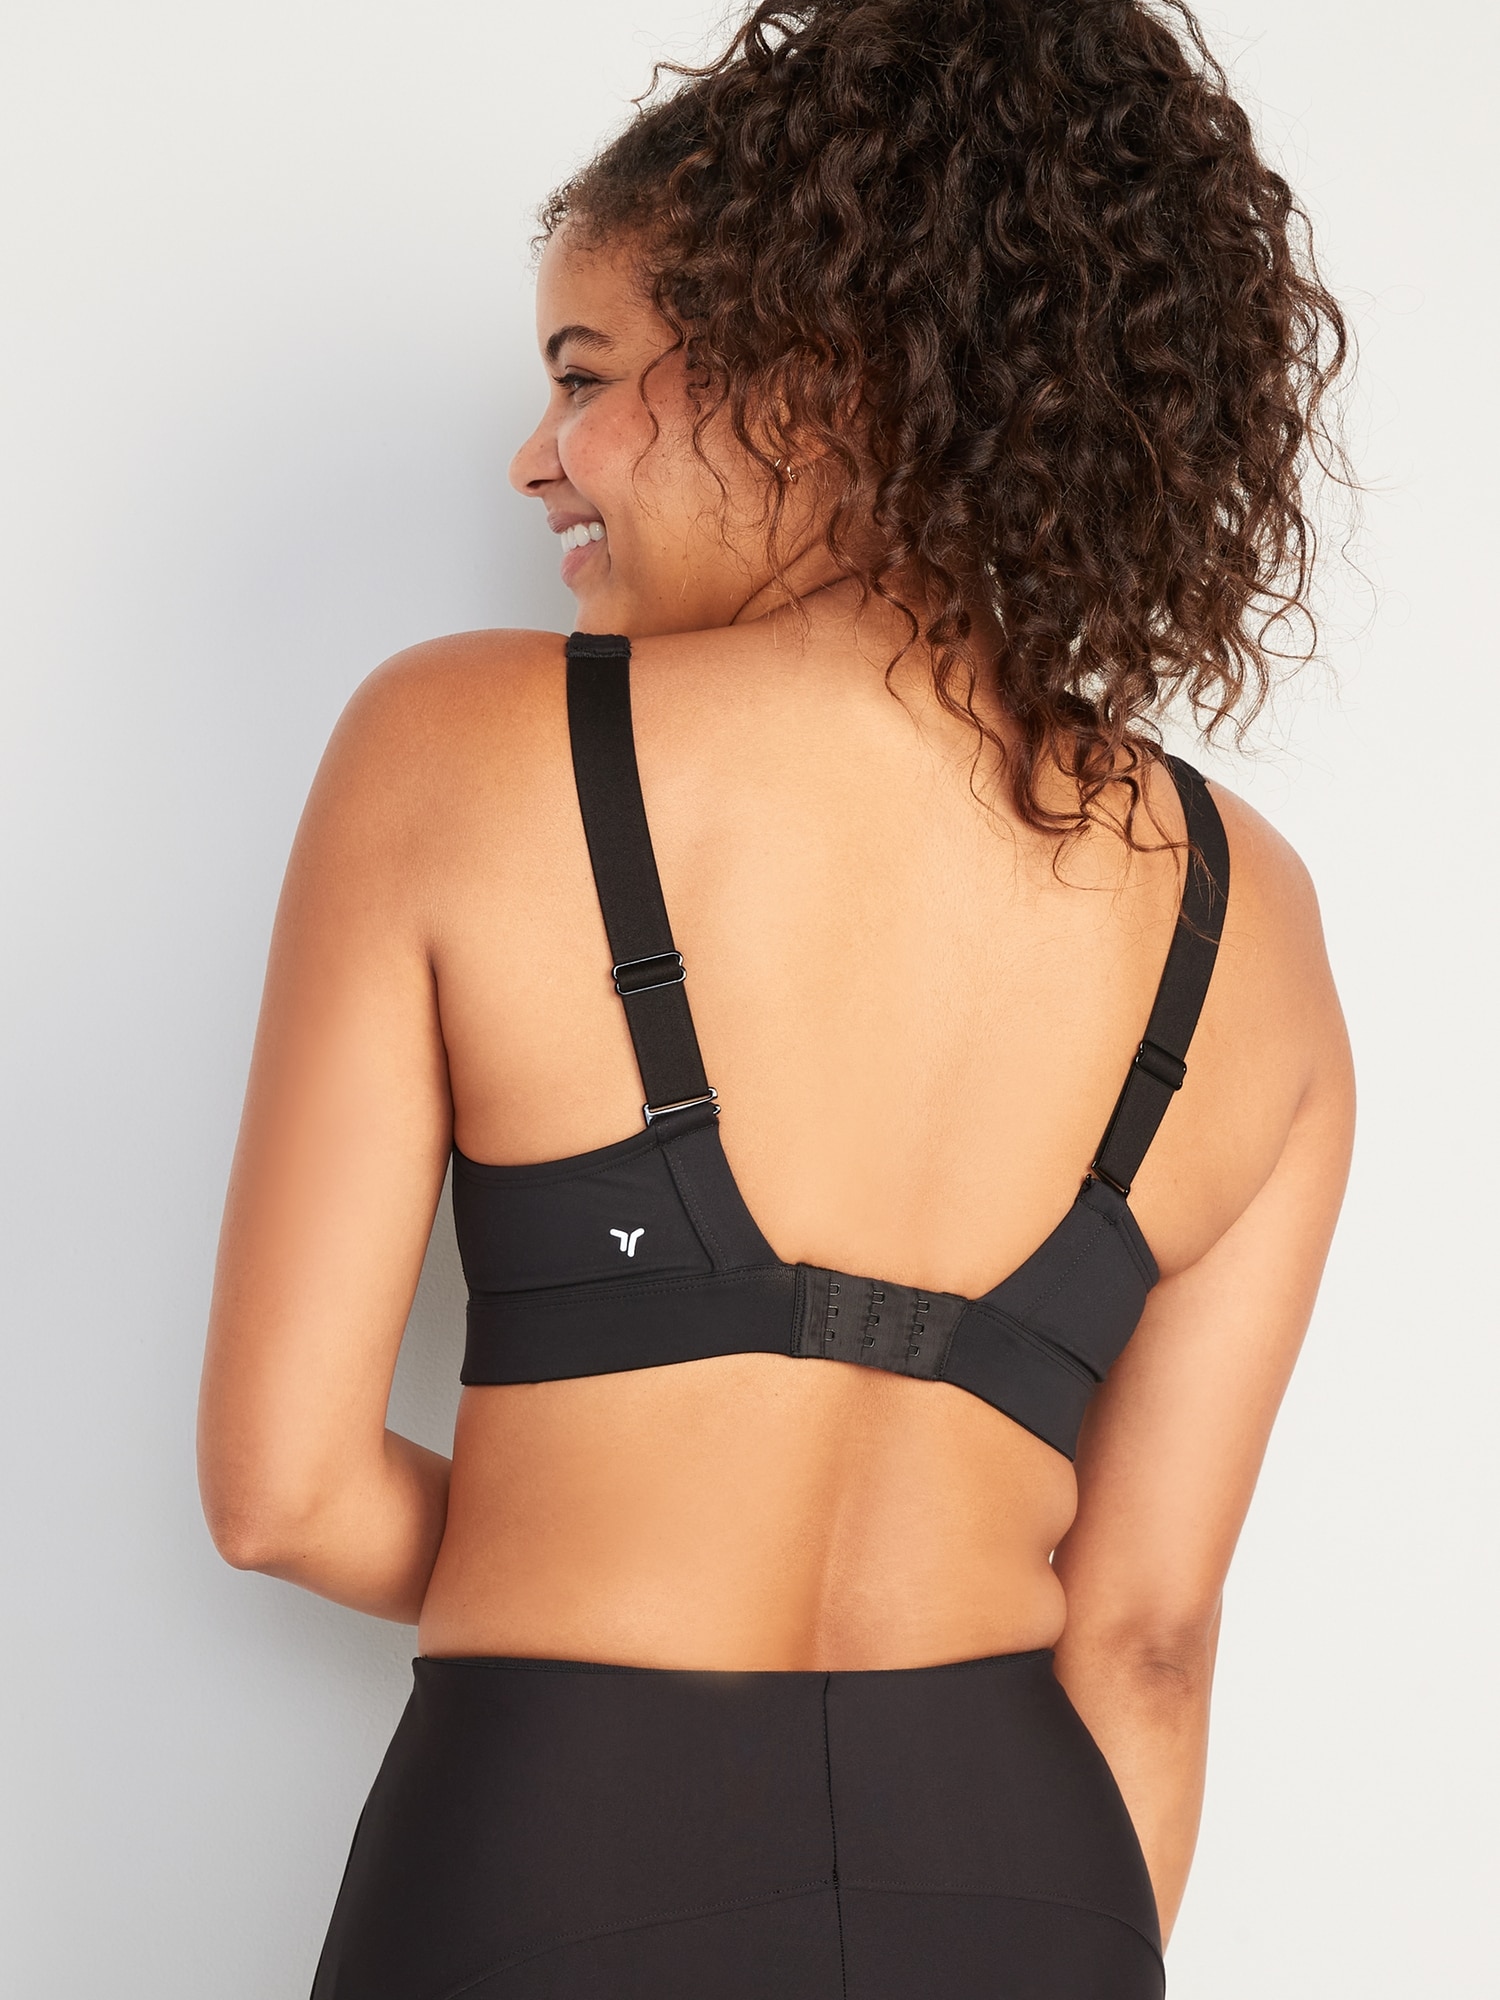 The Most Supportive Sports Bras From Old Navy